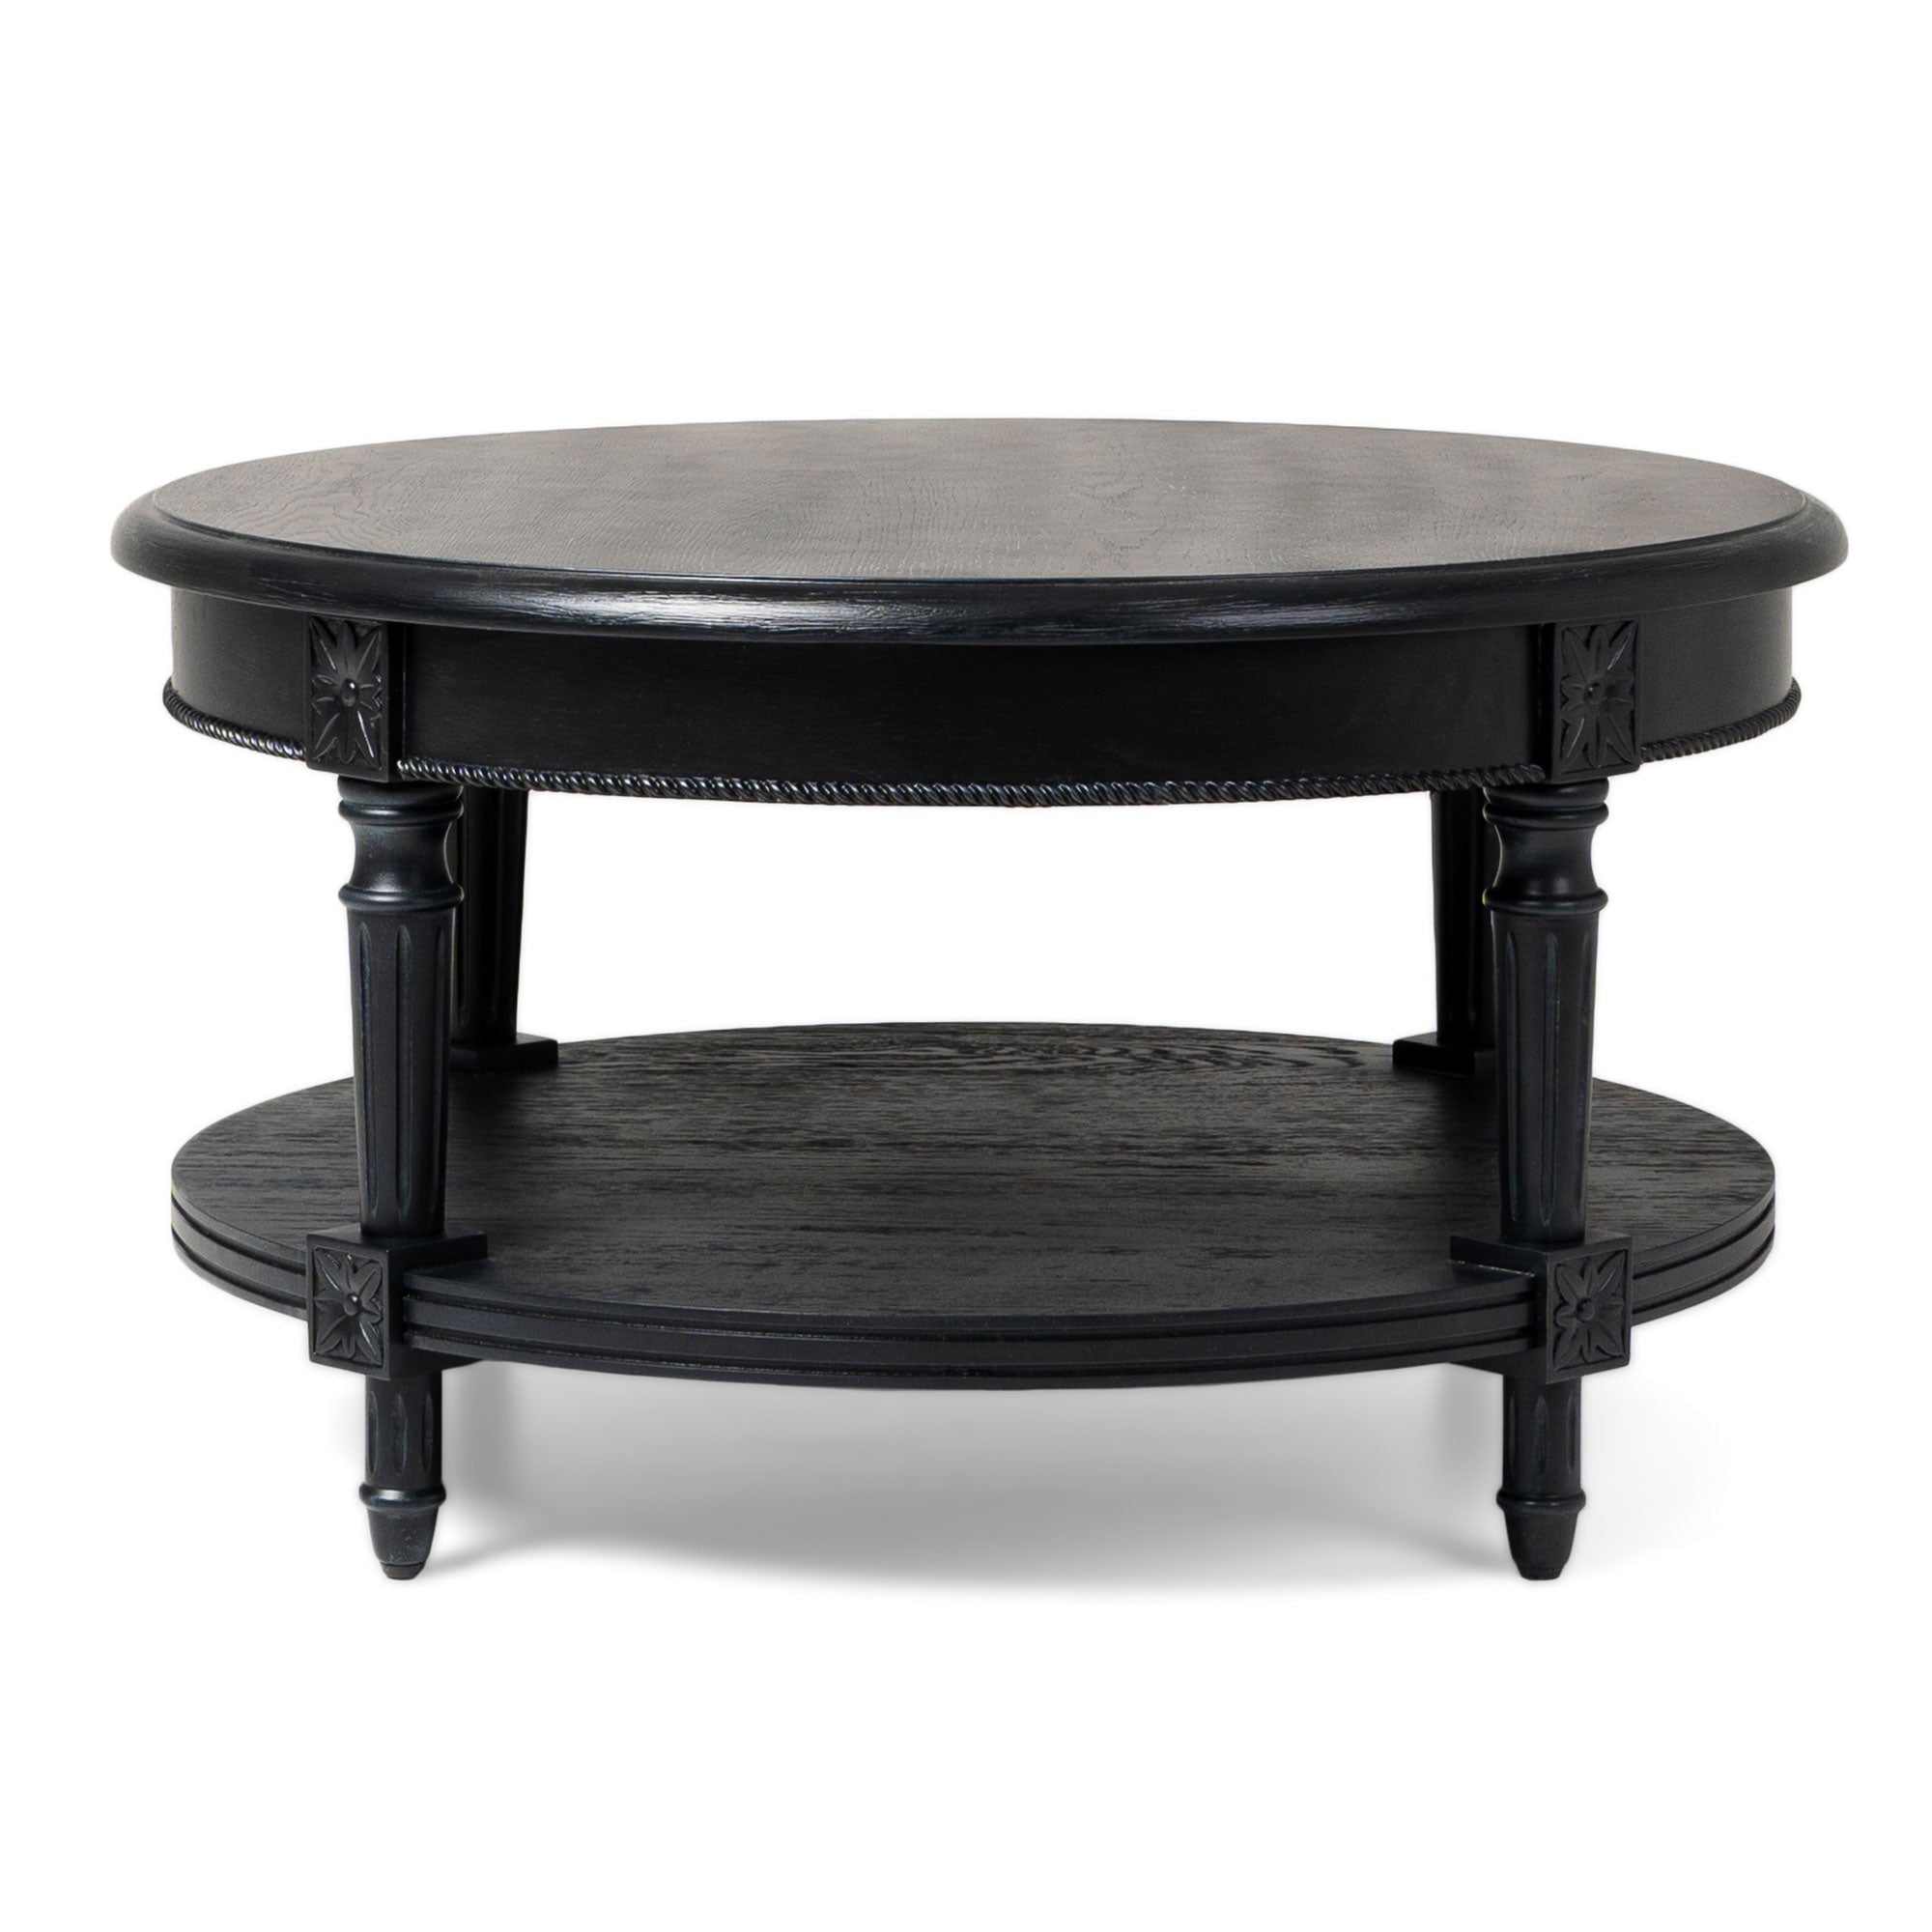 Pullman Traditional Round Wooden Coffee Table in Antiqued Black Finish in Accent Tables by Maven Lane